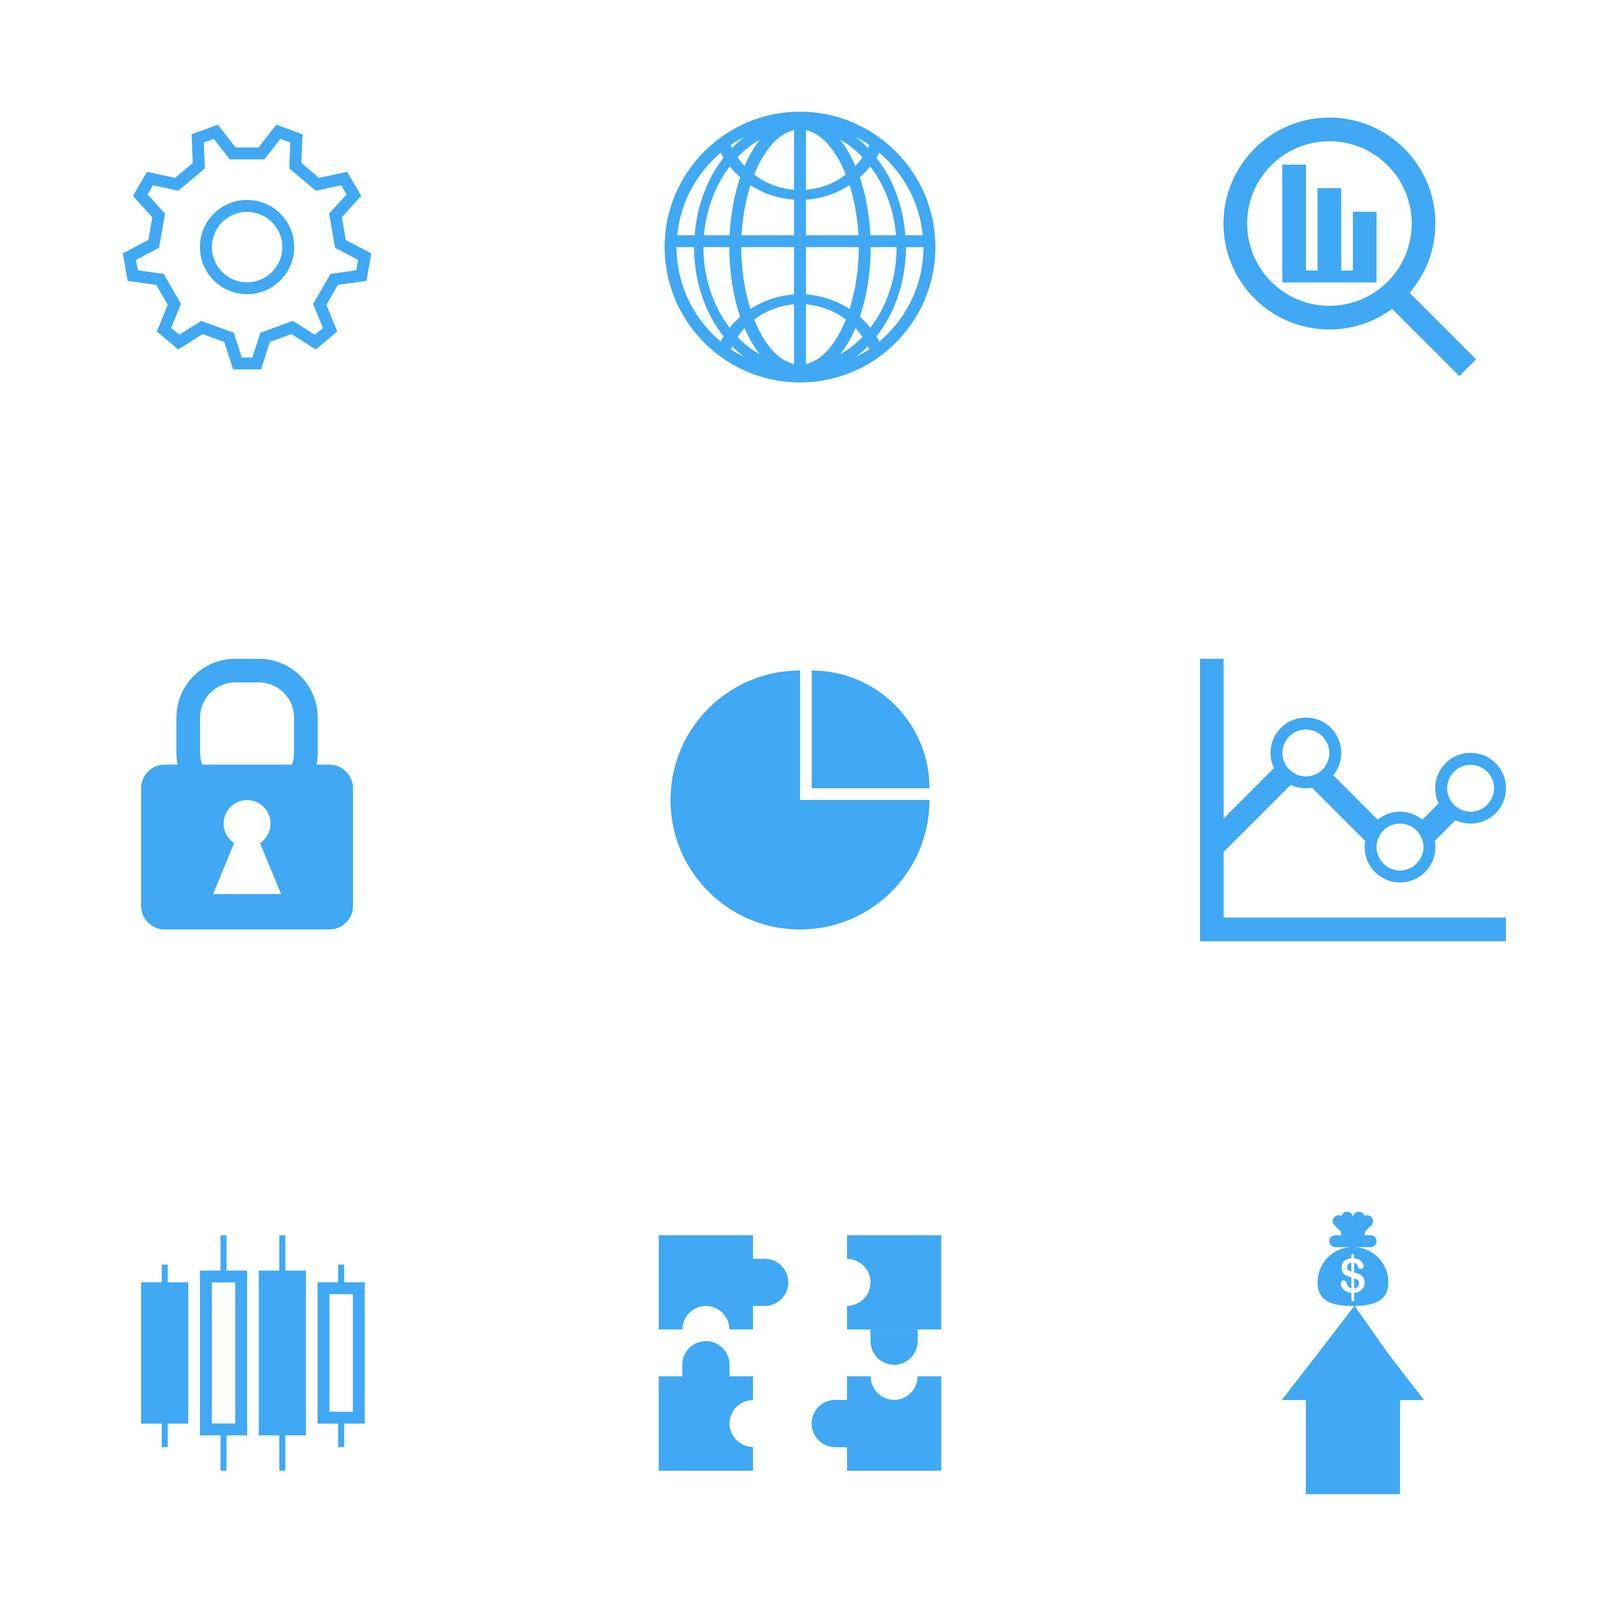 Financial icon set. icons such as graph,charts, global and others with a white background.